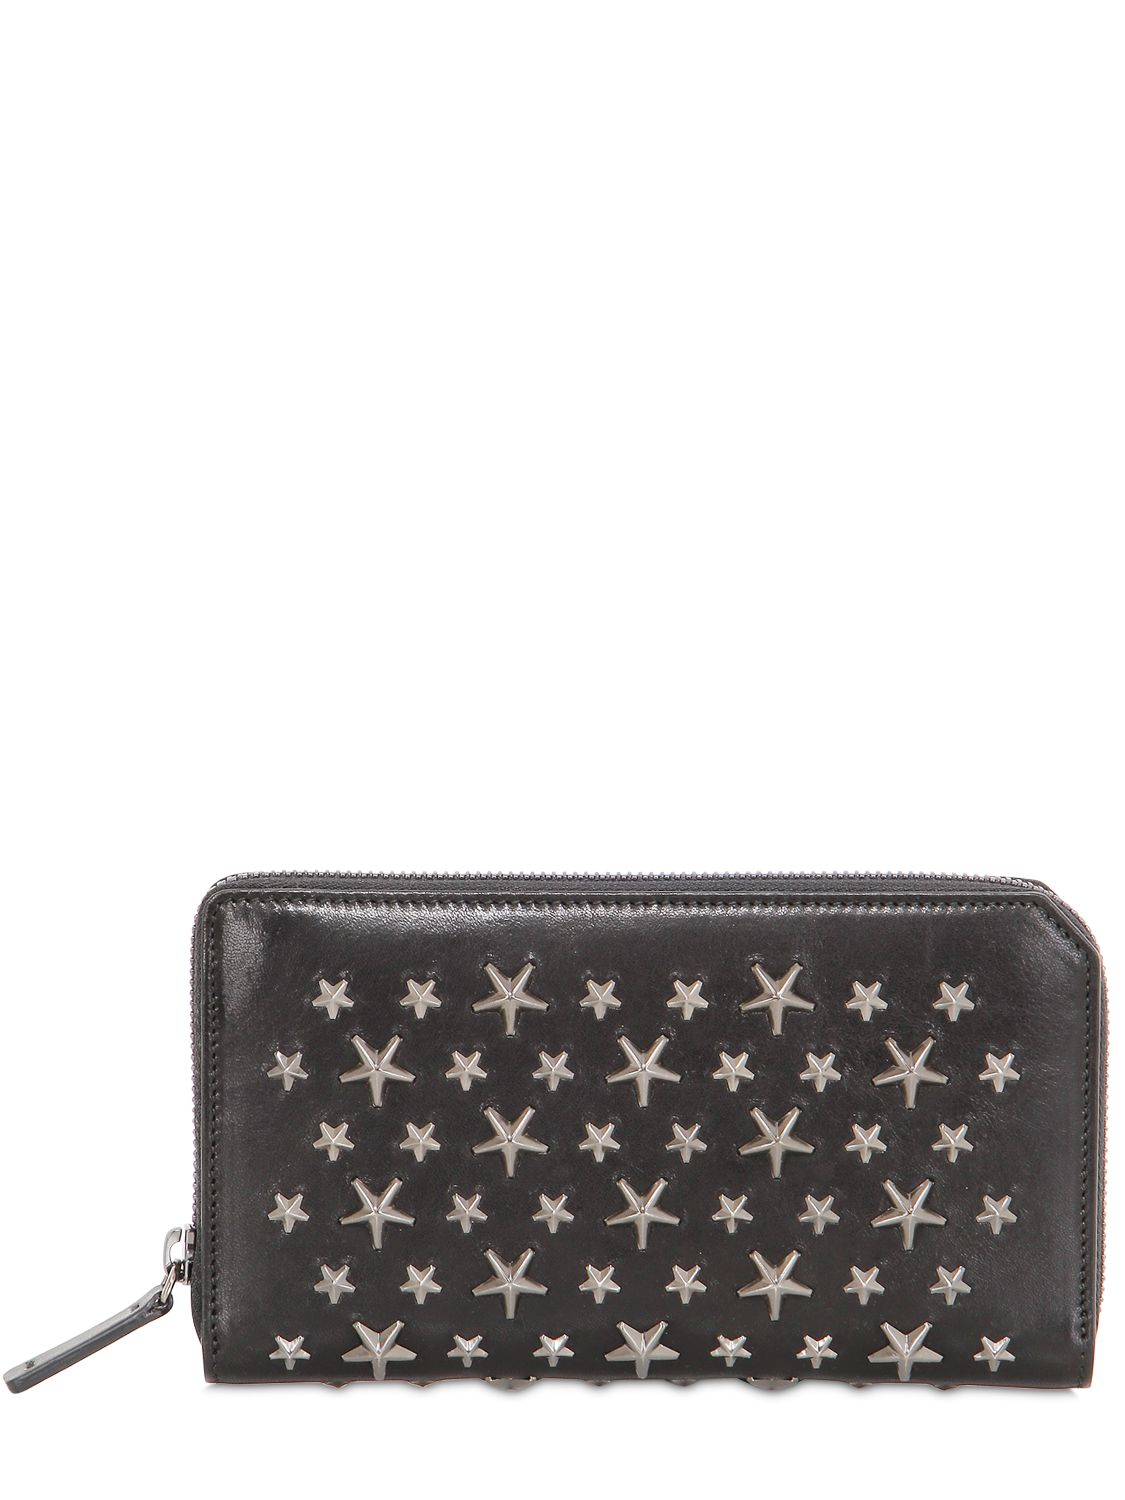 Jimmy choo Stars Studded Leather Zip Around Wallet in Black (BLACK/SILVER)